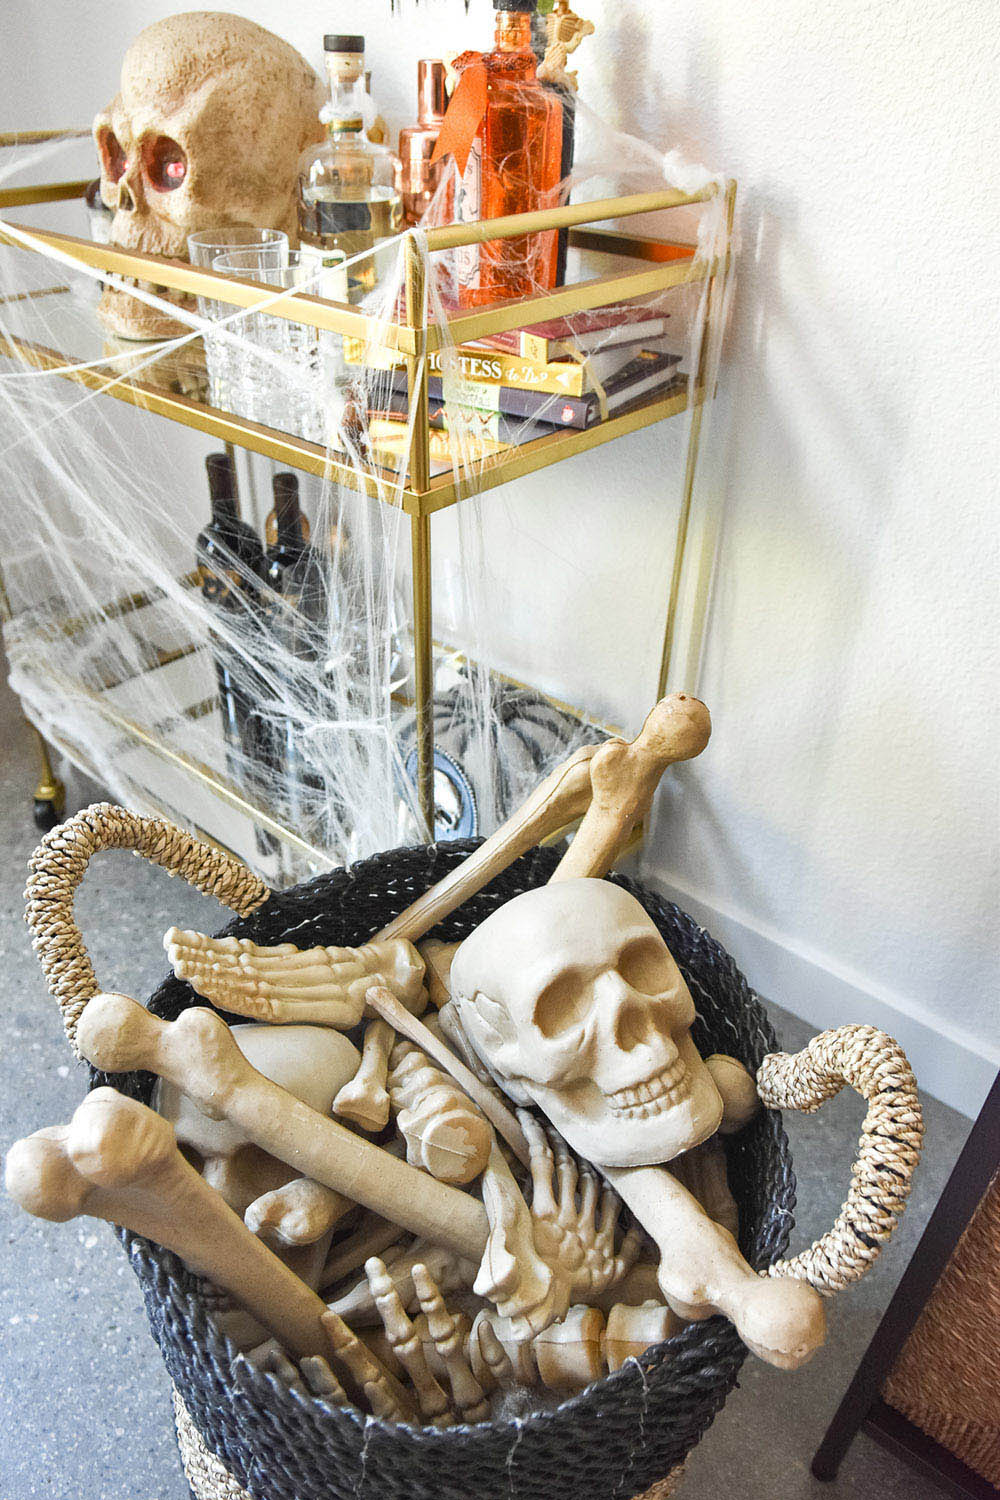 A basket filled with skeleton bones sits next to a bar cart decorated with spider webs.